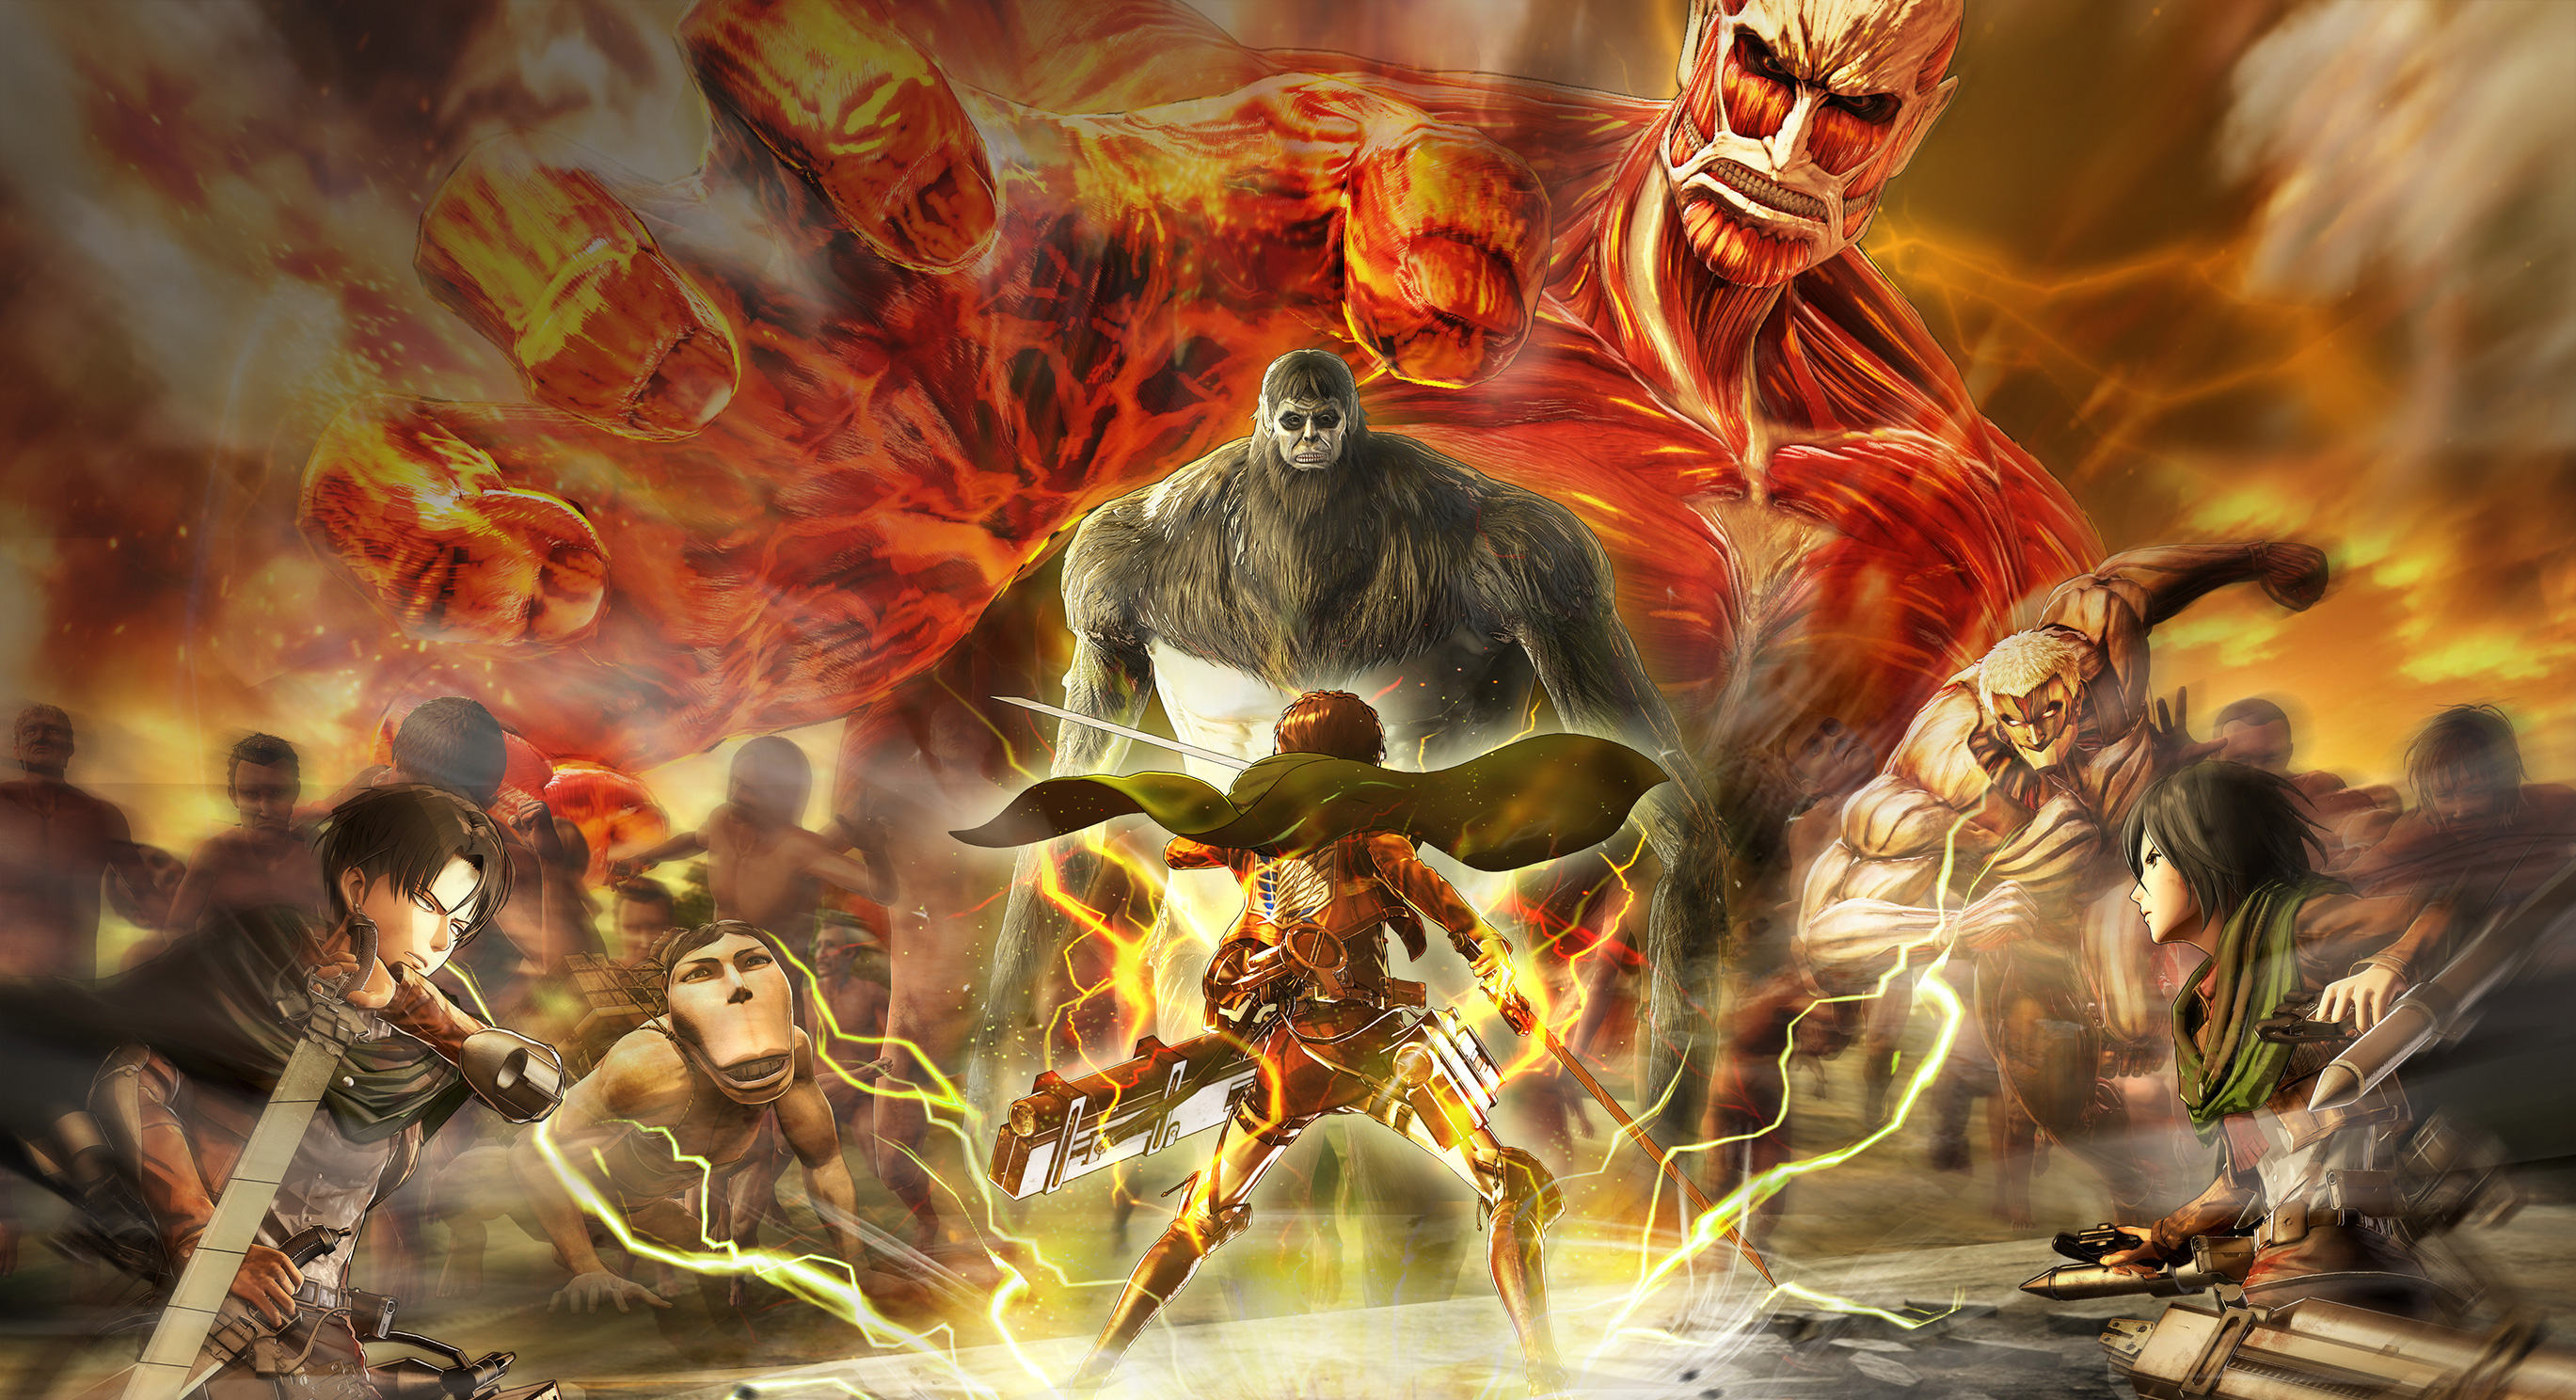 Attack on Titan Anime HD Wallpapers | 4K Backgrounds - Wallpapers Den